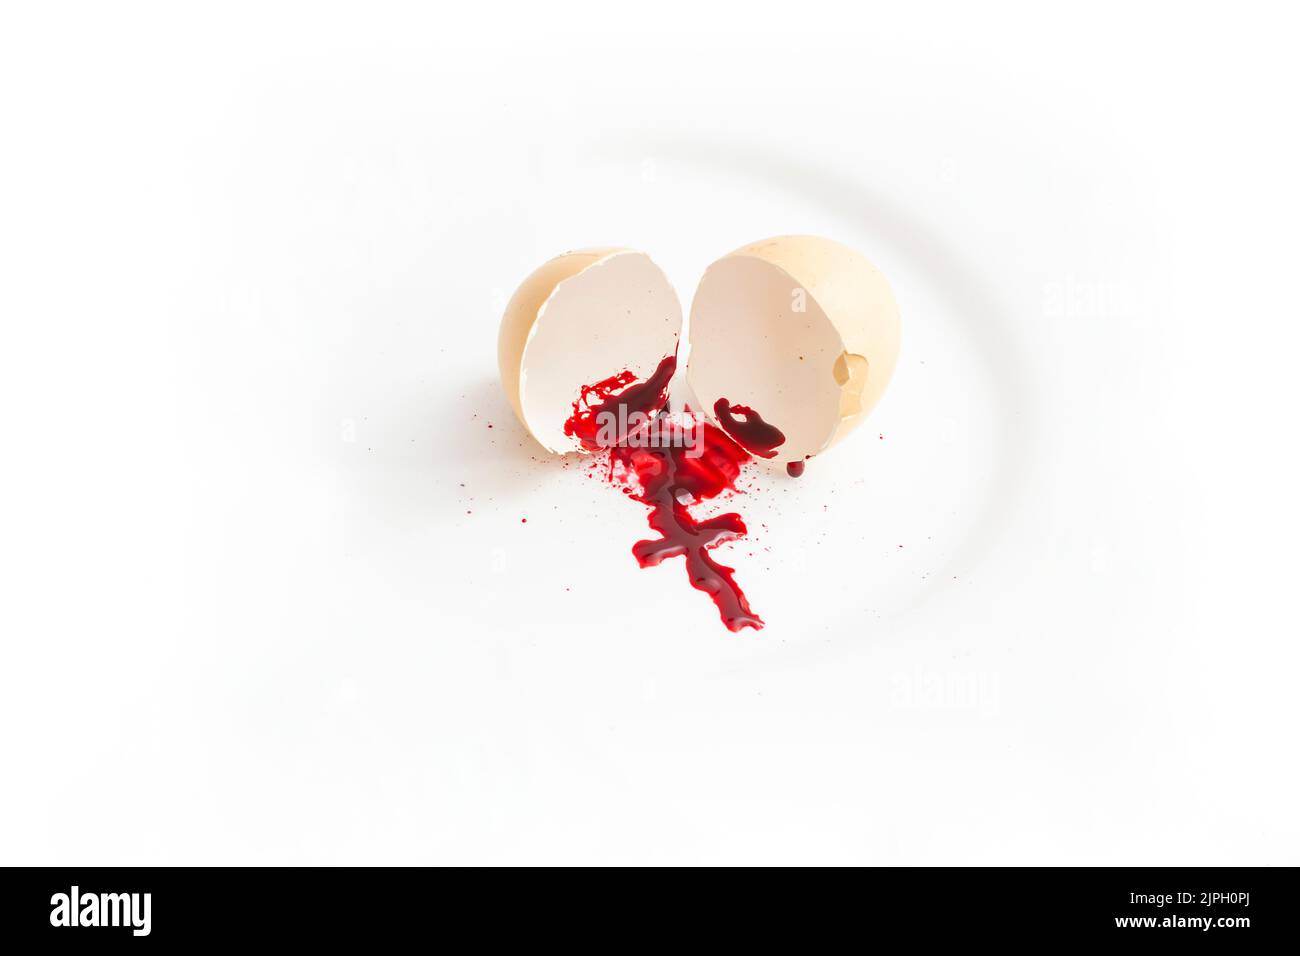 Egg shell with blood trail forming a crucifix.  Abortion metaphorical concept. Stock Photo